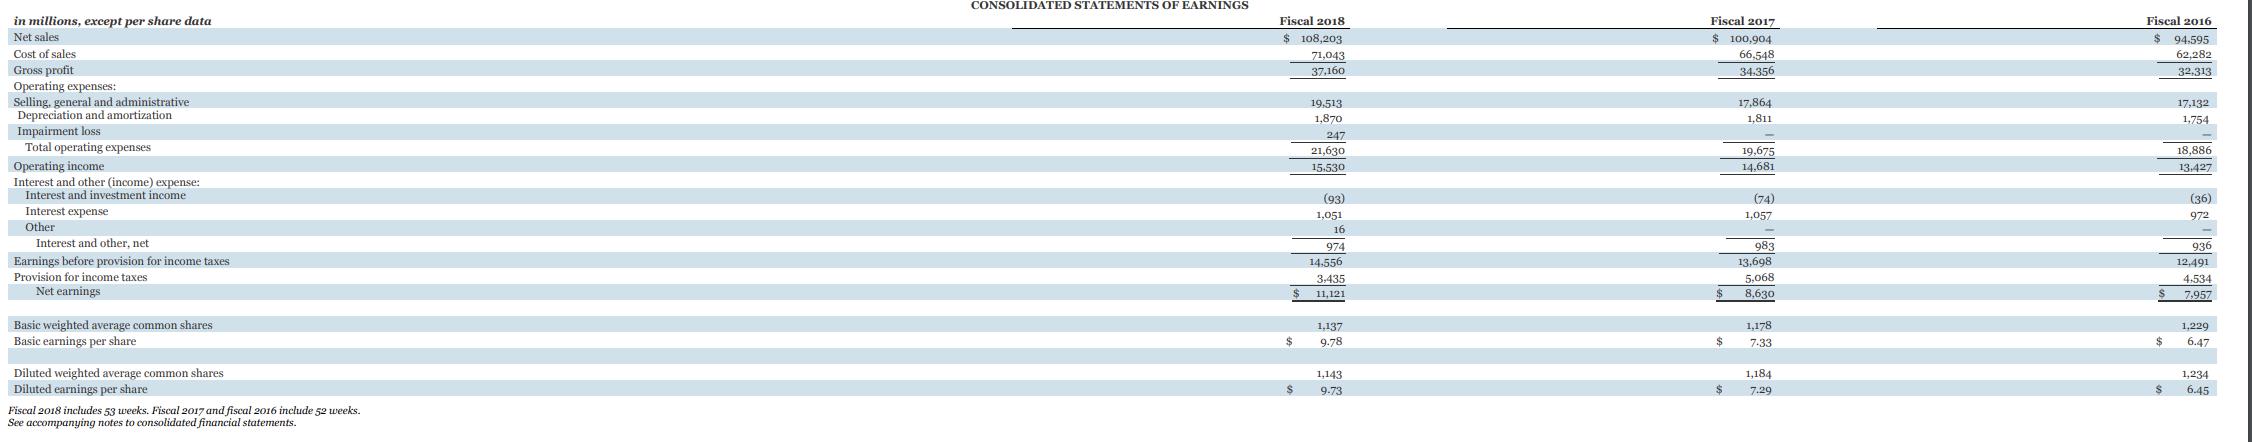 CONSOLIDATED STATEMENTS OF EARNINGS Fiscal 2018 $ 108,203 71,043 37,160 Fiscal 2017 $ 100,904 66,548 34.356 Fiscal 2016 $ 94,